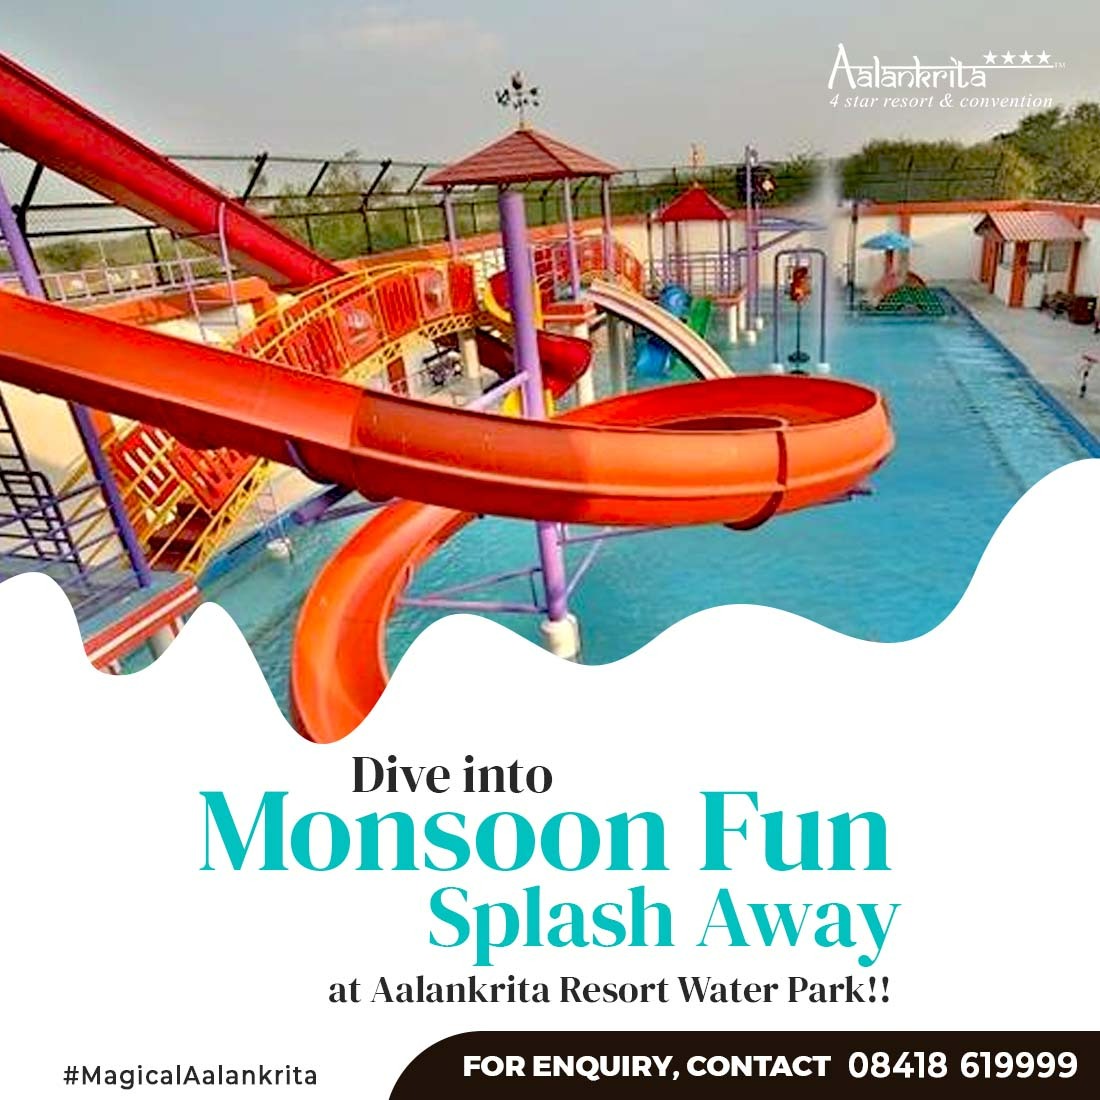 🌧️Looking for the perfect monsoon escape? Visit Aalankrita Resorts Water Park & immerse yourself in a world of fun & excitement! #MonsoonMagic
🌟 Thrilling water slides for all ages
🌟 Rain dance with upbeat music
🌟 Kid-friendly splash zones
🌟 Delicious food & refreshing drinks